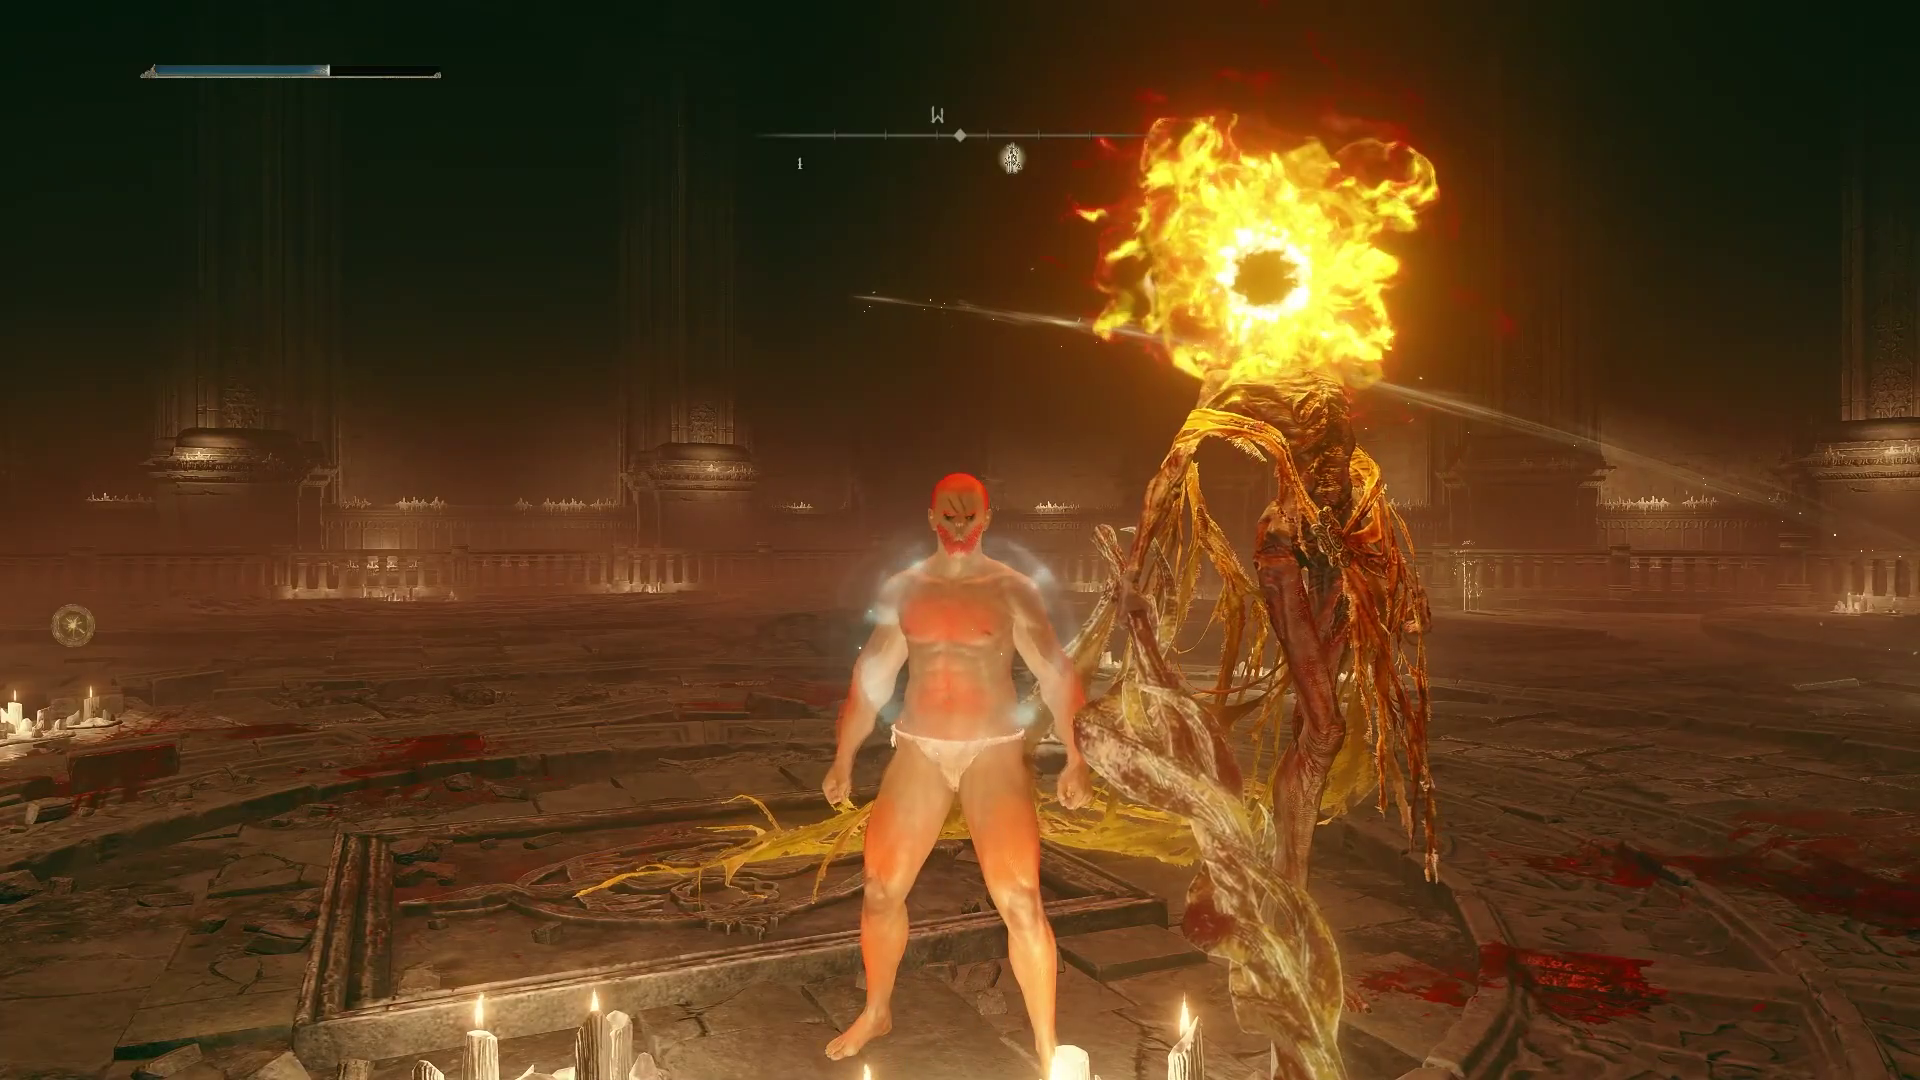 An image of a character from Elden Ring standing in front of a boss summon using a mod.